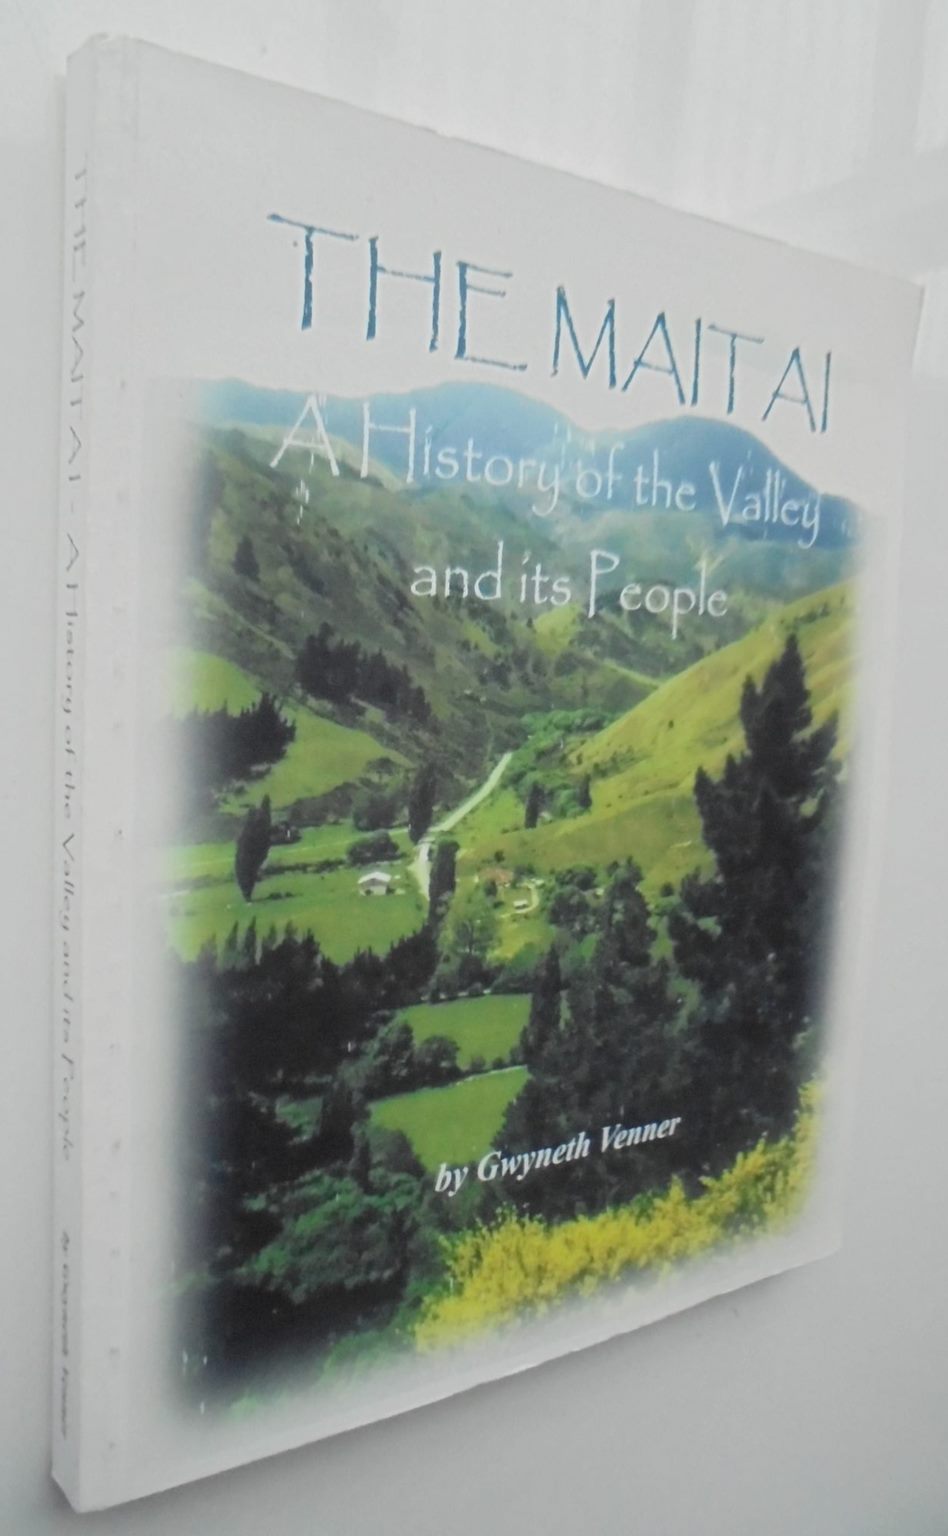 The Maitai: A History of the Valley and Its People. BY Gwyneth Venner. SIGNED BY AUTHOR, VERY SCARCE.